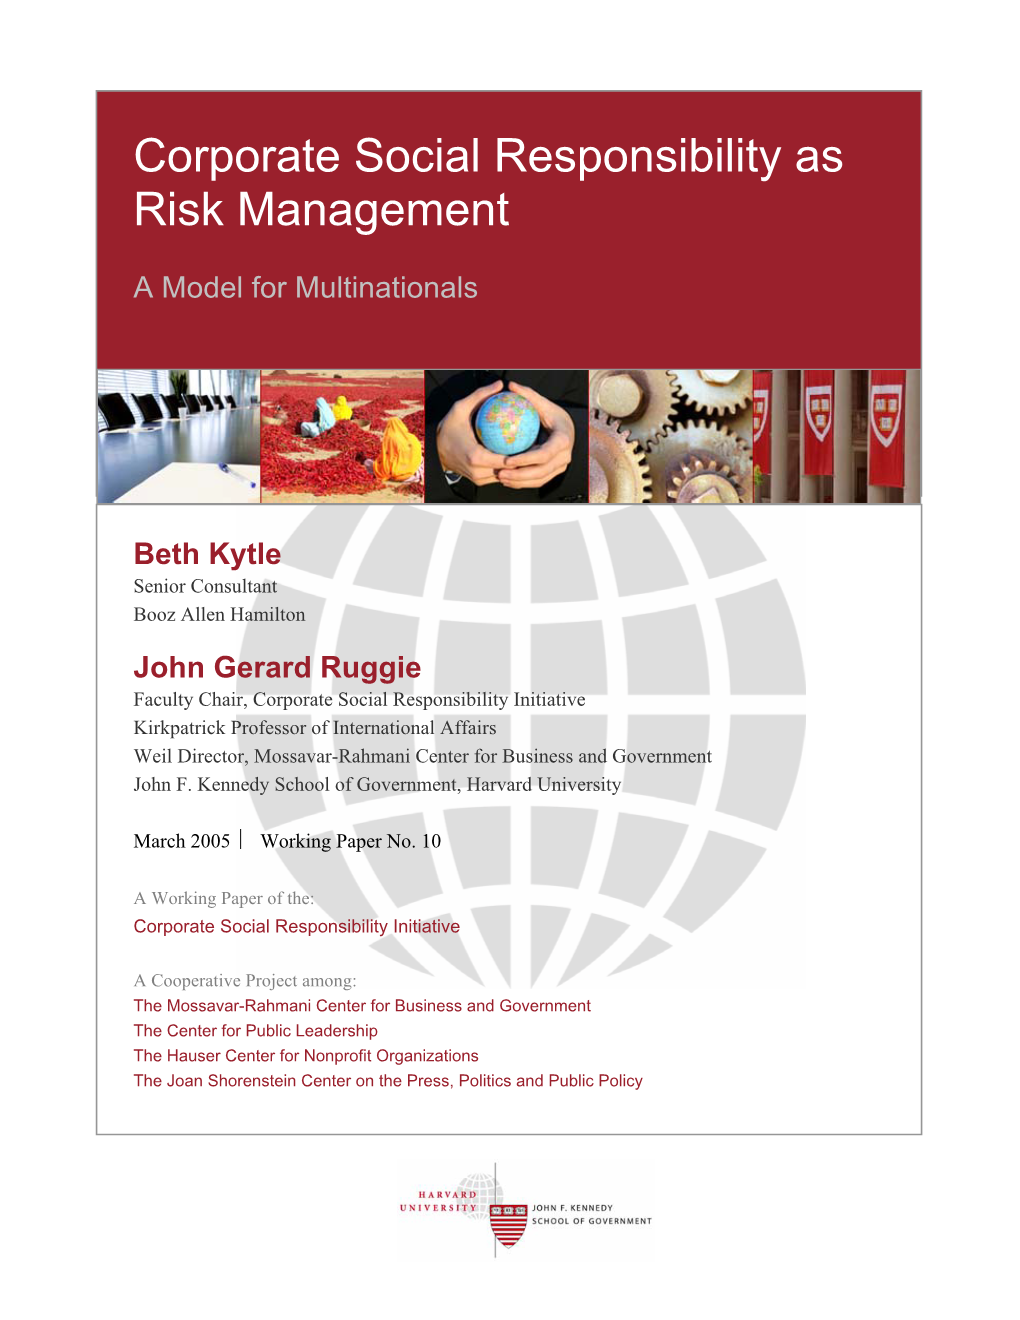 Corporate Social Responsibility As Risk Management